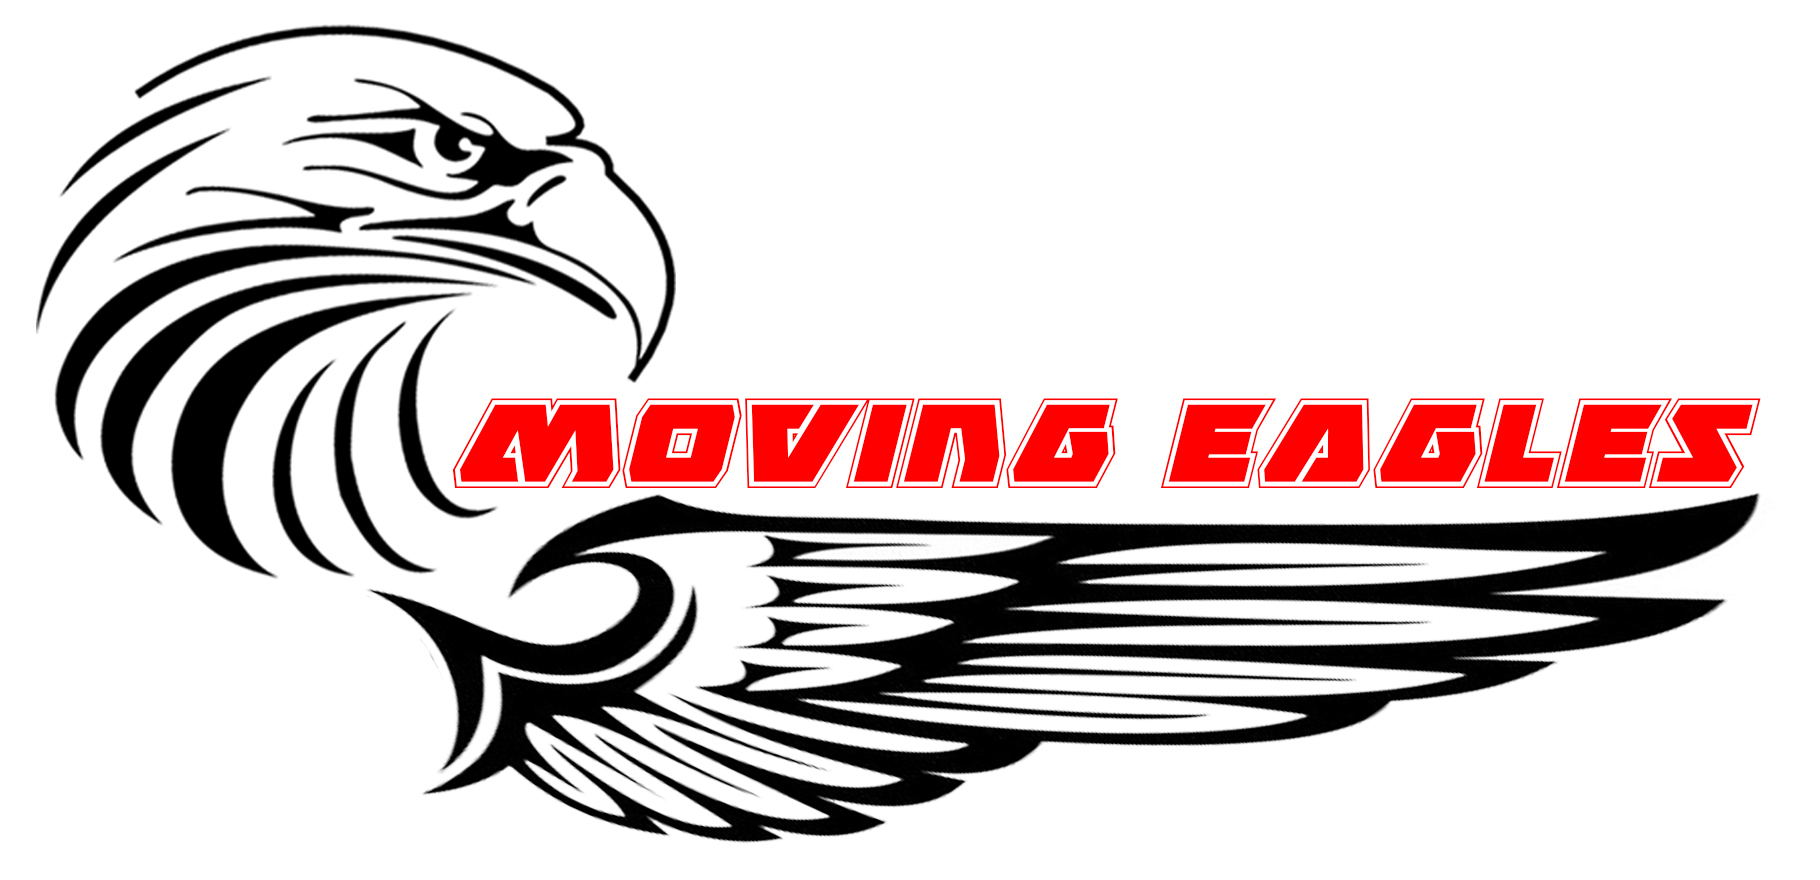 Moving Eagles